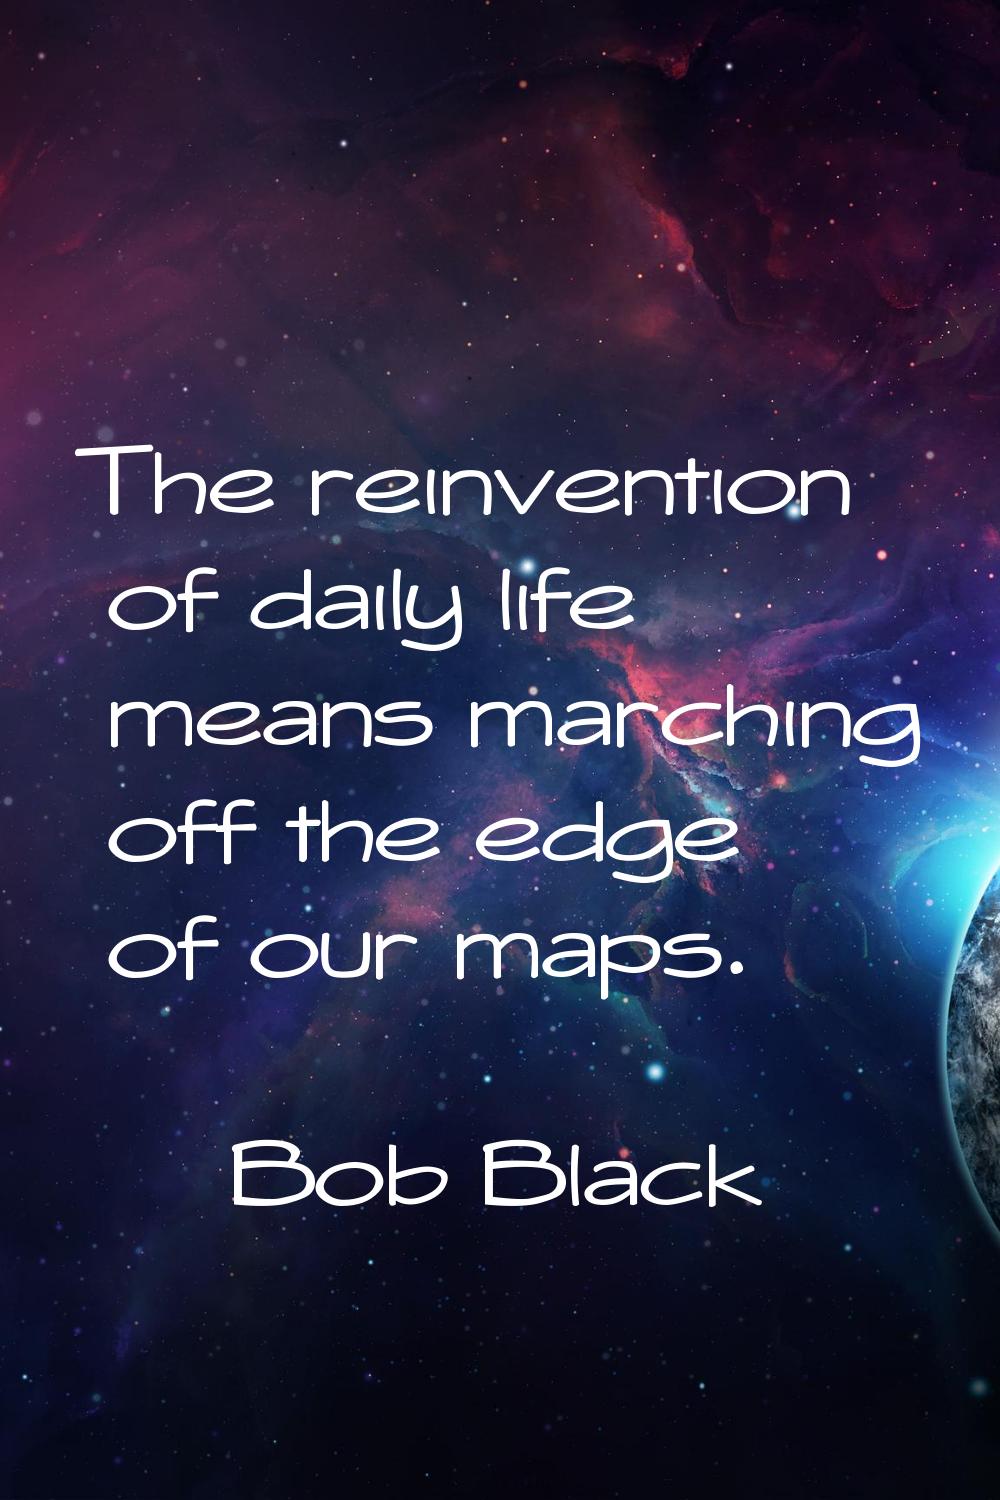 The reinvention of daily life means marching off the edge of our maps.